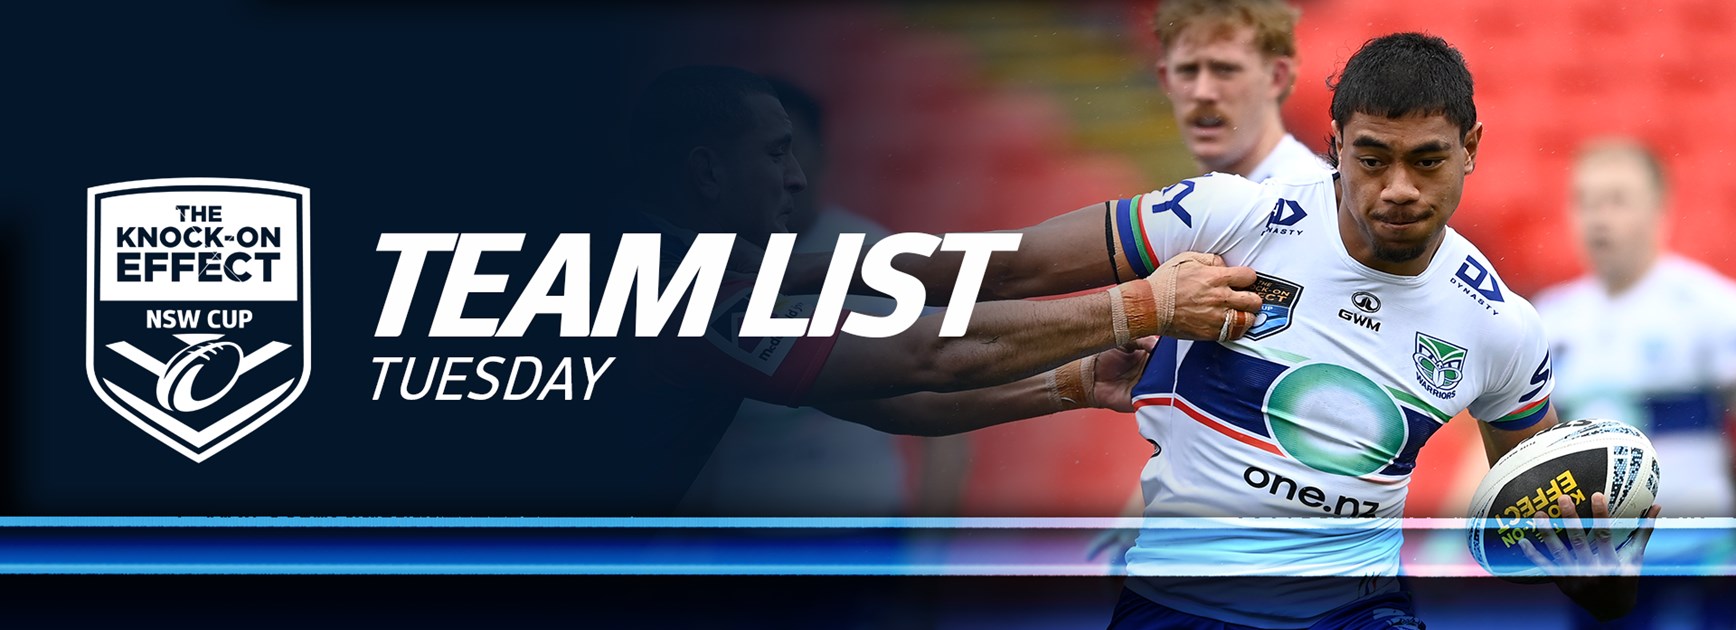 Team List Tuesday | The Knock-On Effect NSW Cup - Round 10